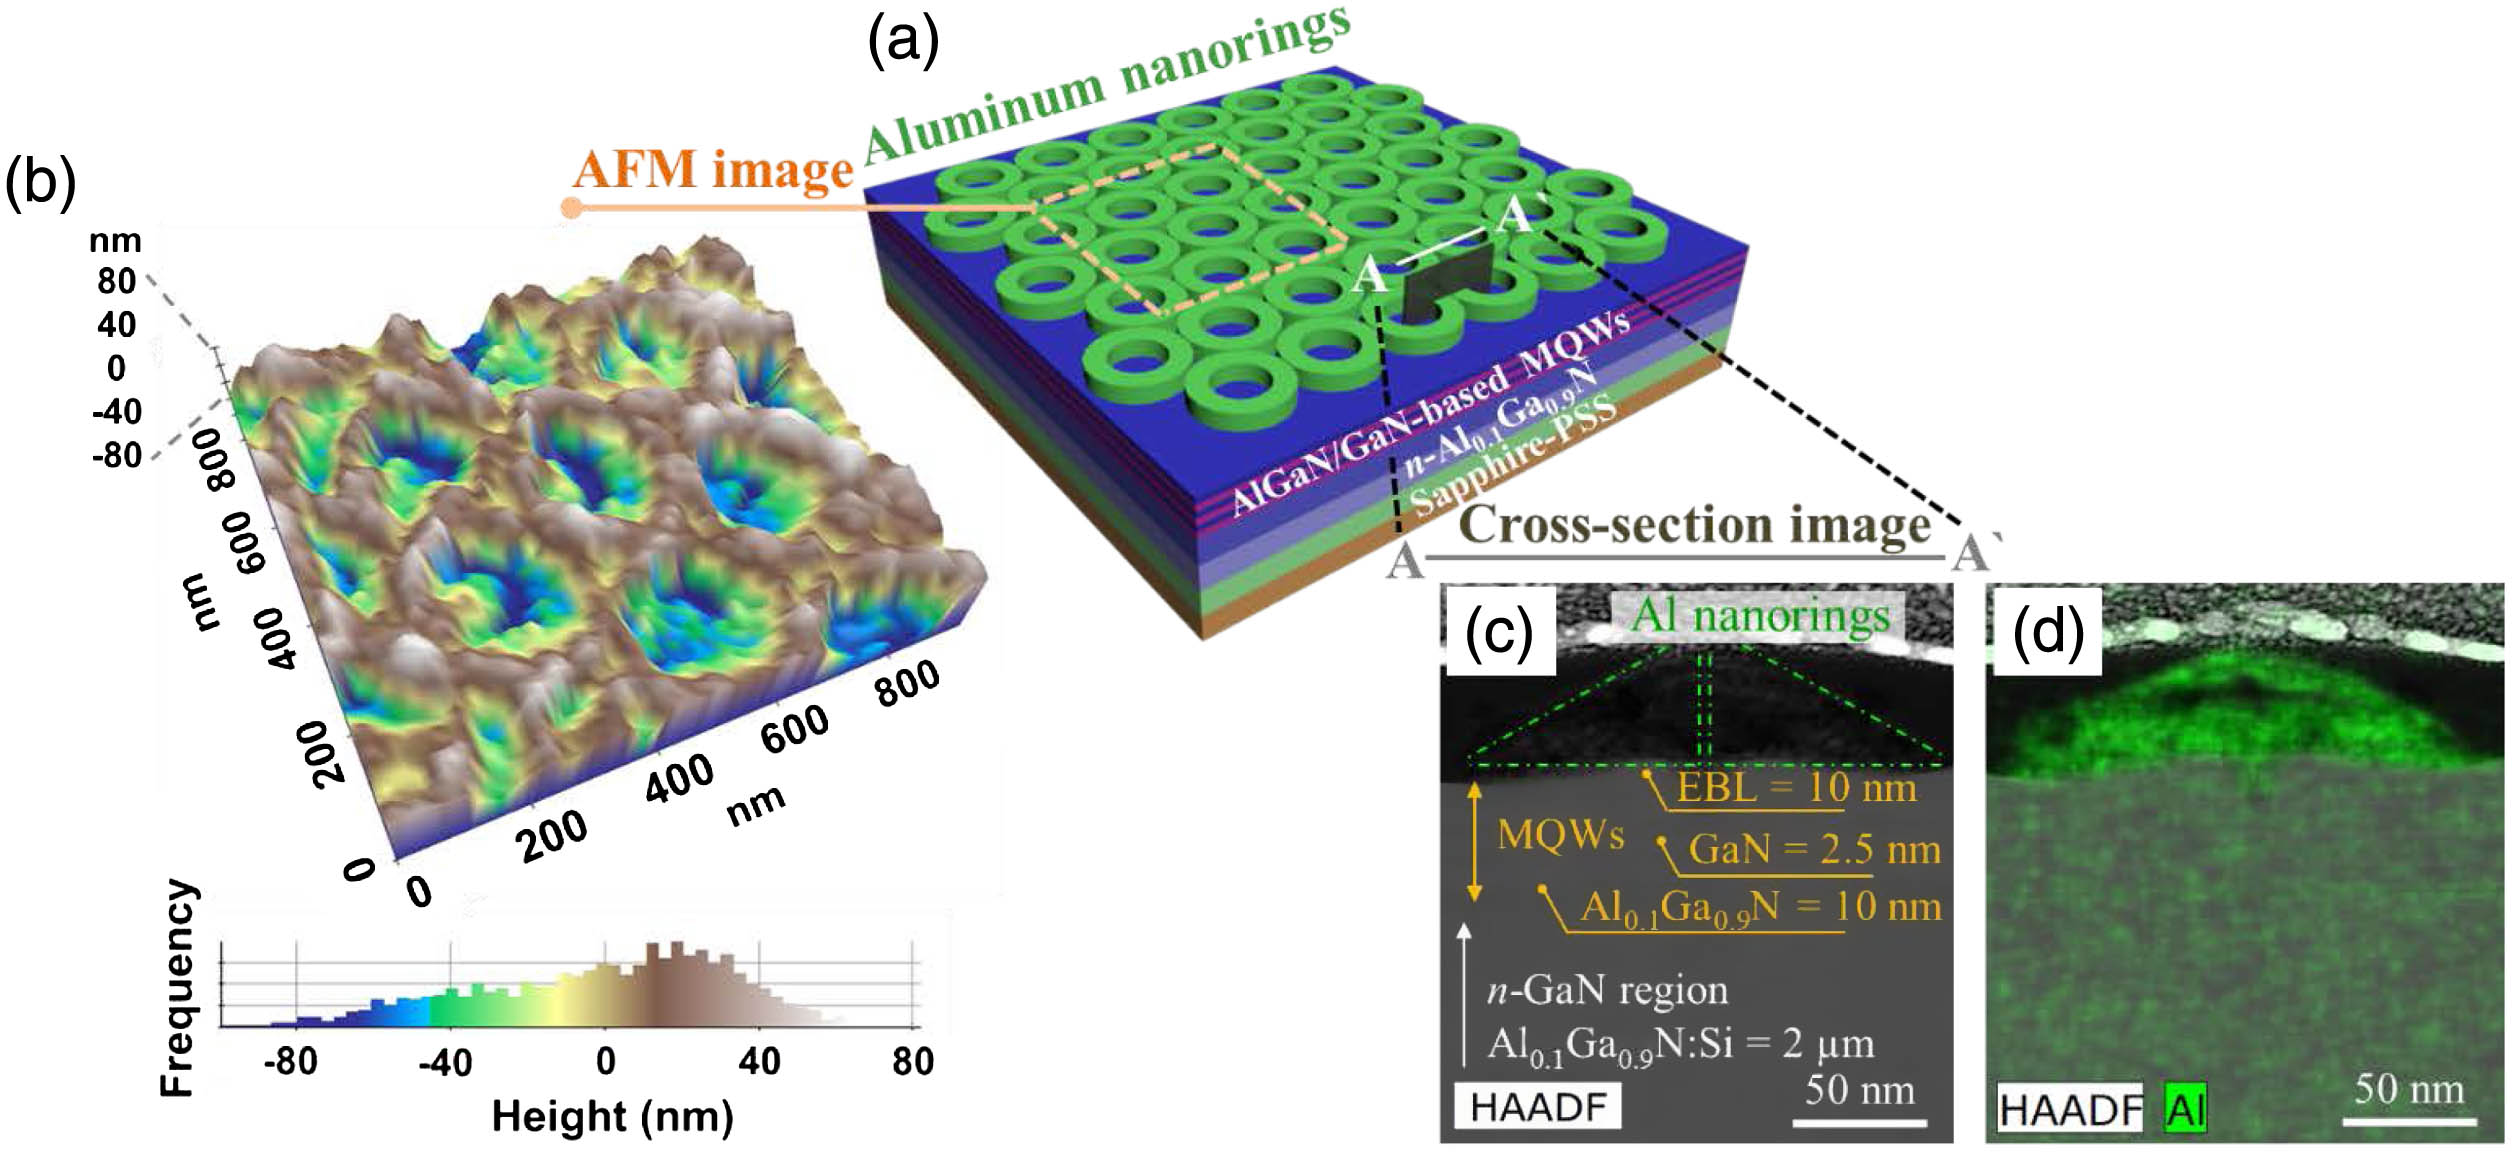 (a) Schematic of the AlGaN/GaN-based near-UV LED structure with Al nanorings to capture both AFM and TEM images. (b) AFM image of the top surface of the near-UV LED with 385 nm Al nanorings that have an HCP array structure and height distribution. (c) STEM cross-sectional image of the AlGaN/GaN-based near-UV LED with Al nanorings and (d) the corresponding EDS mapping image of Al element (green color).